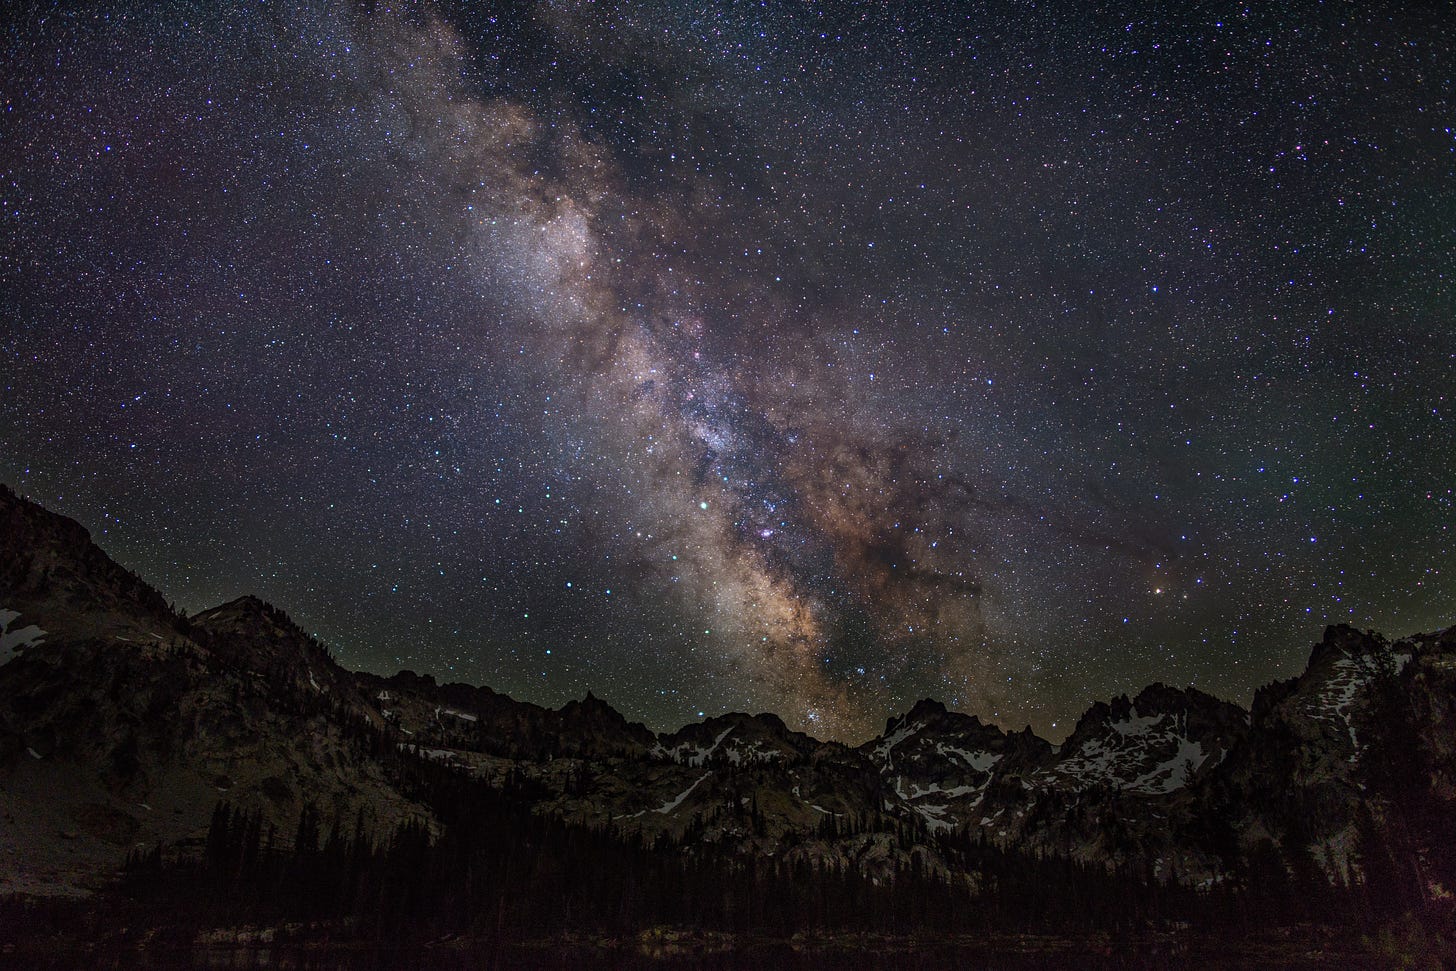 Milky Way, stars, and the Sawtooth Mountains.